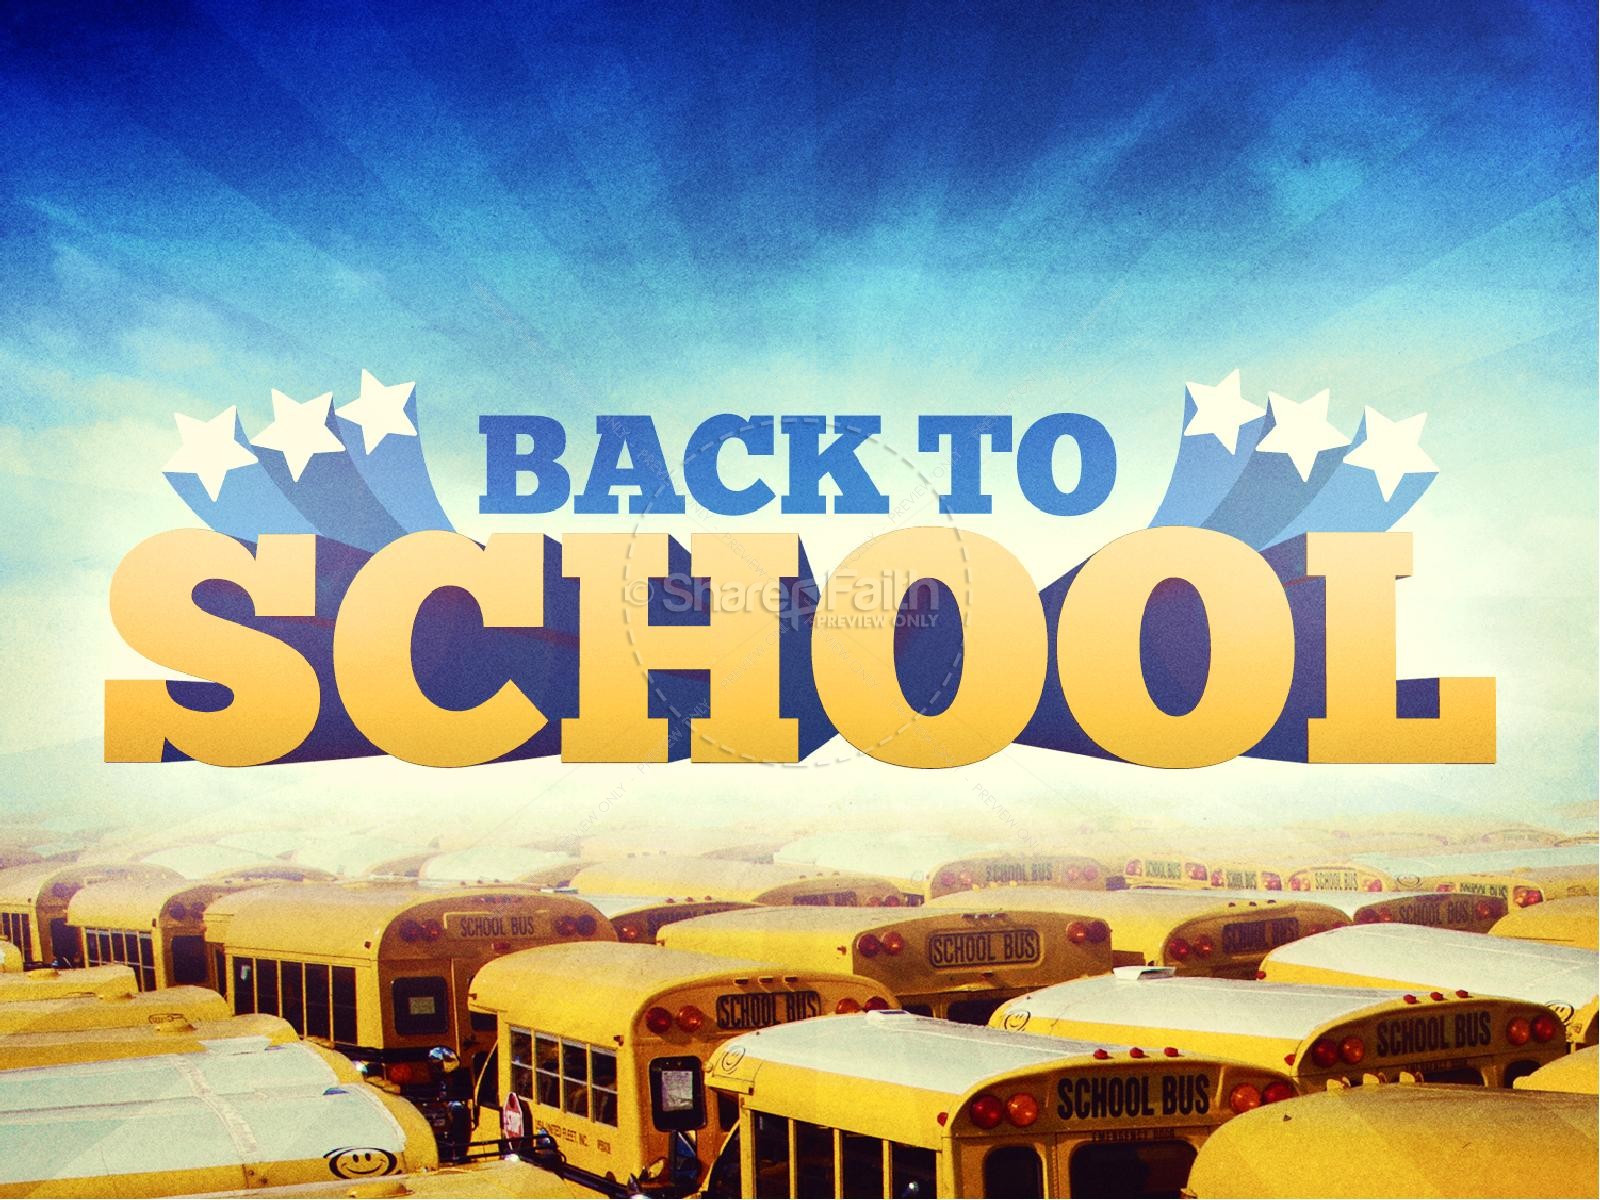 School Buses Top Back to School Graphics PowerPoints Thumbnail 1